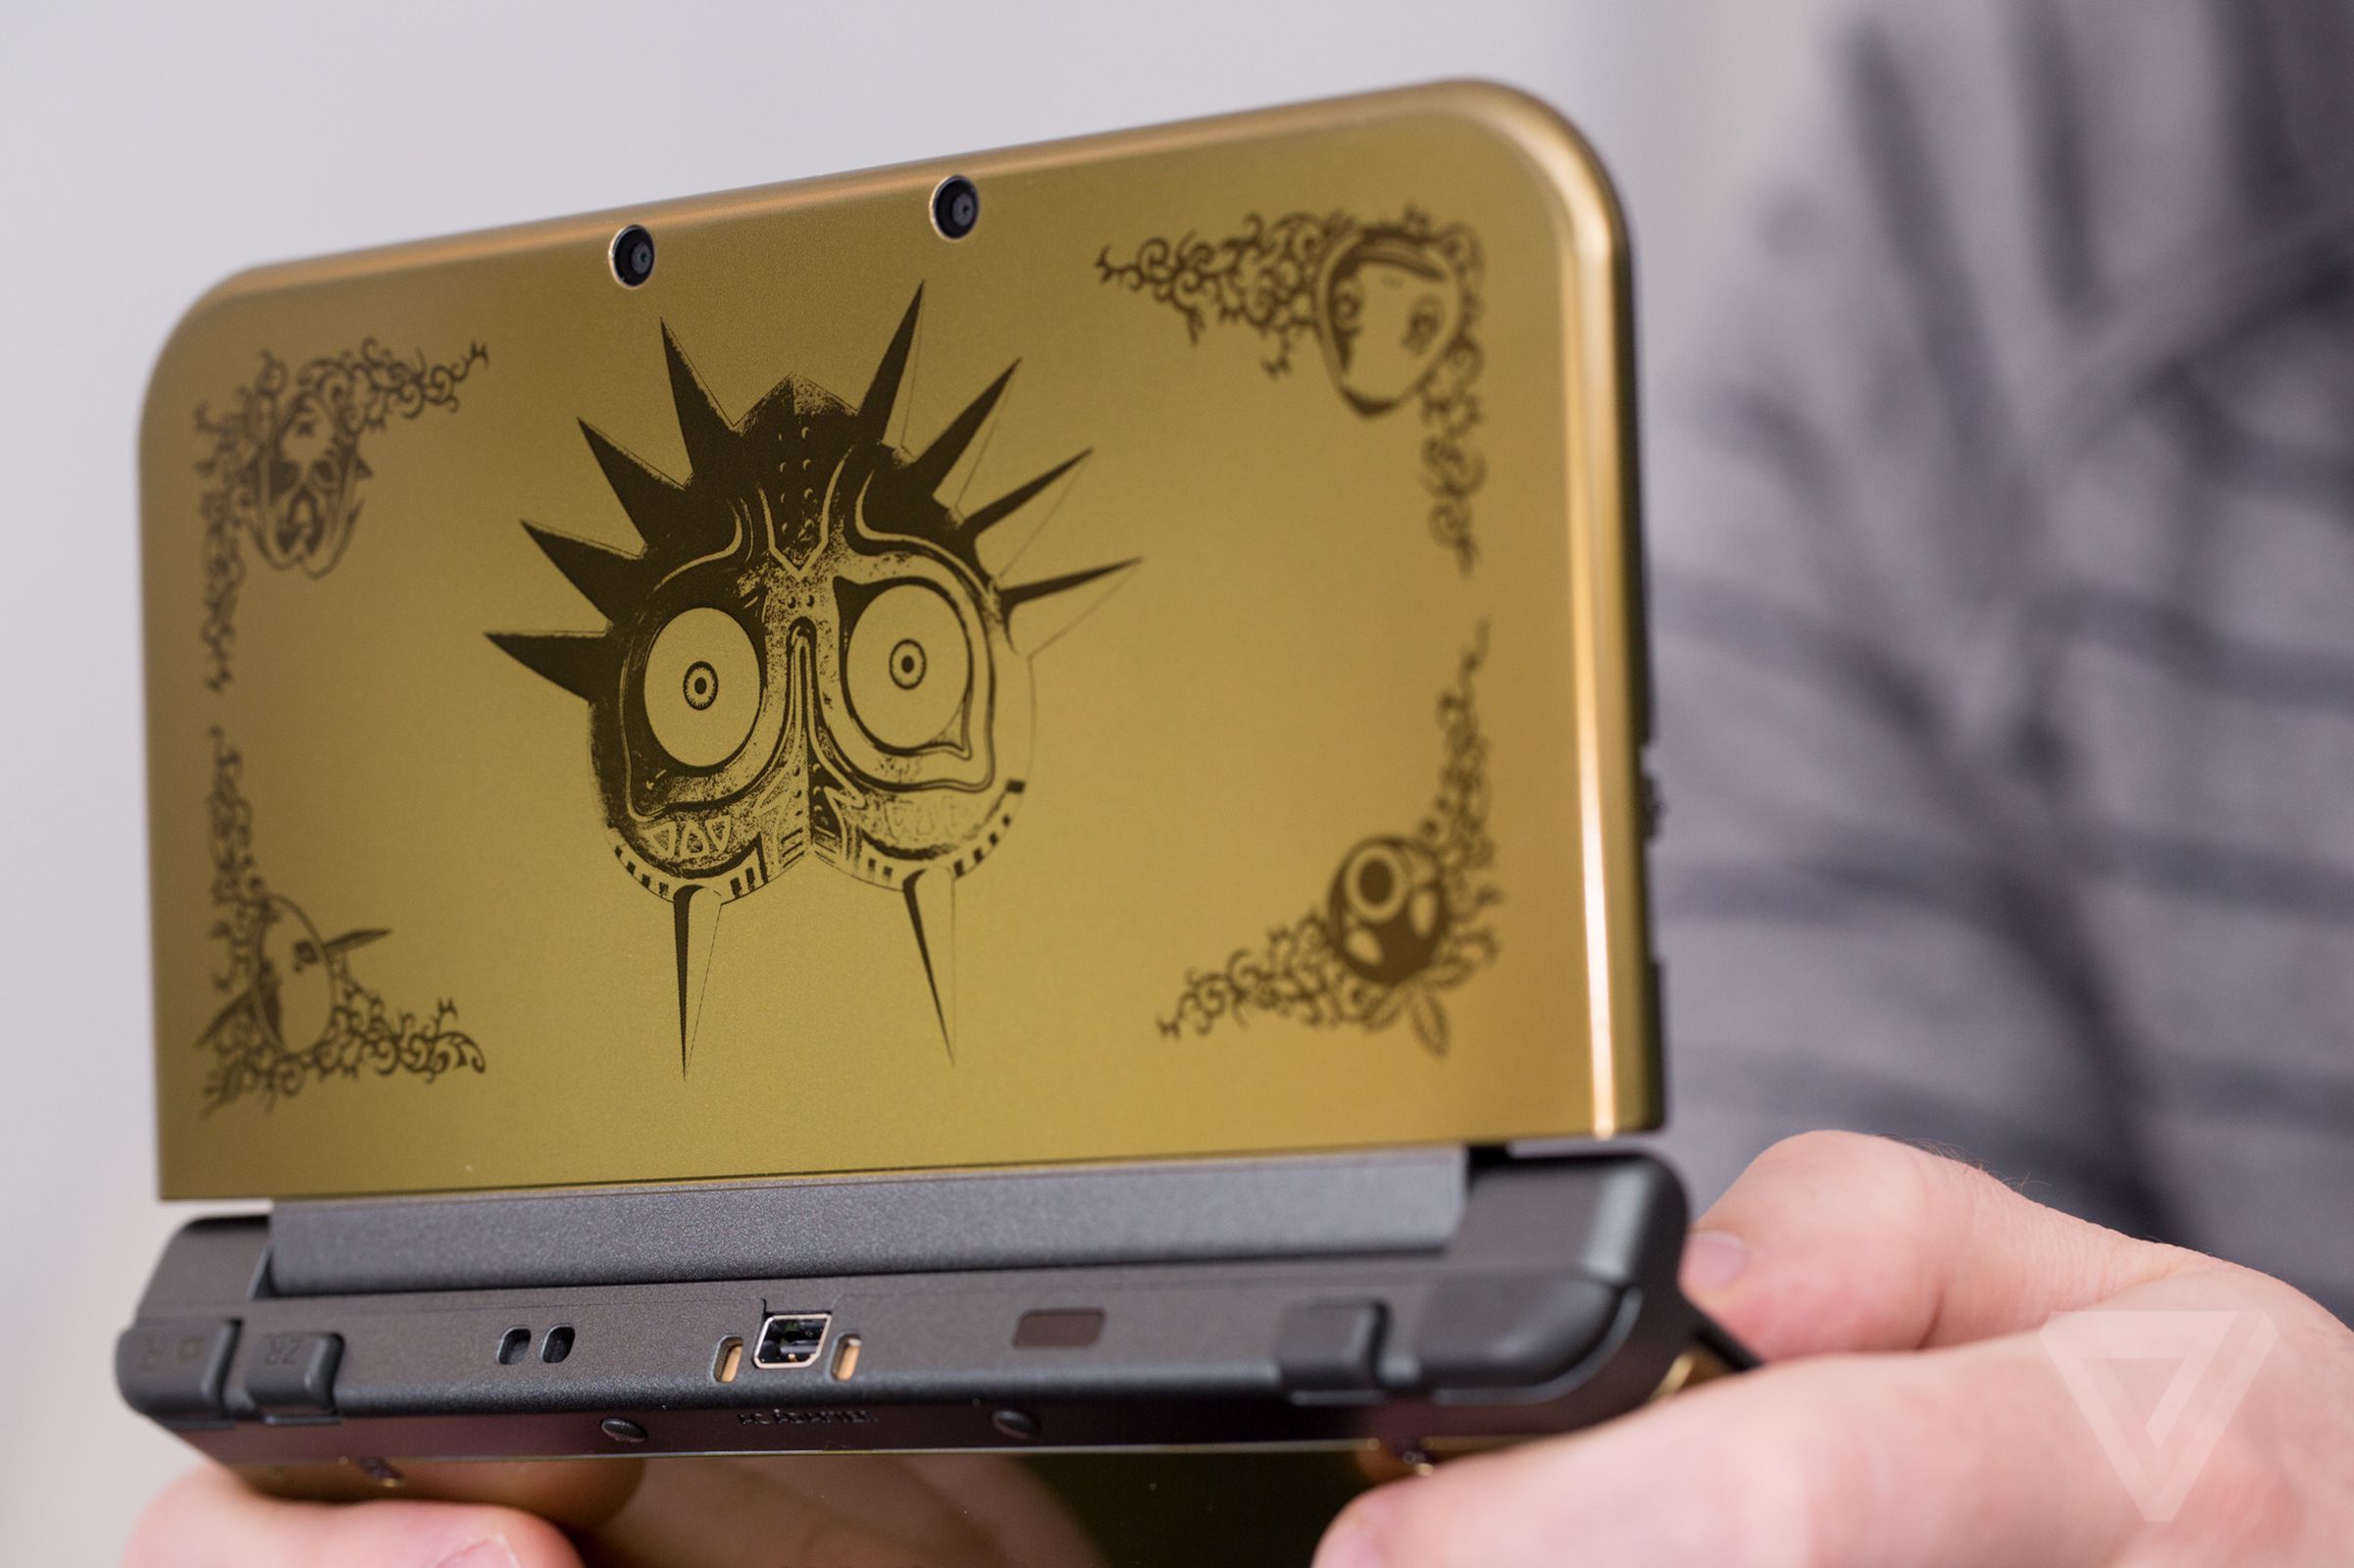 The new 3DS XL special edition